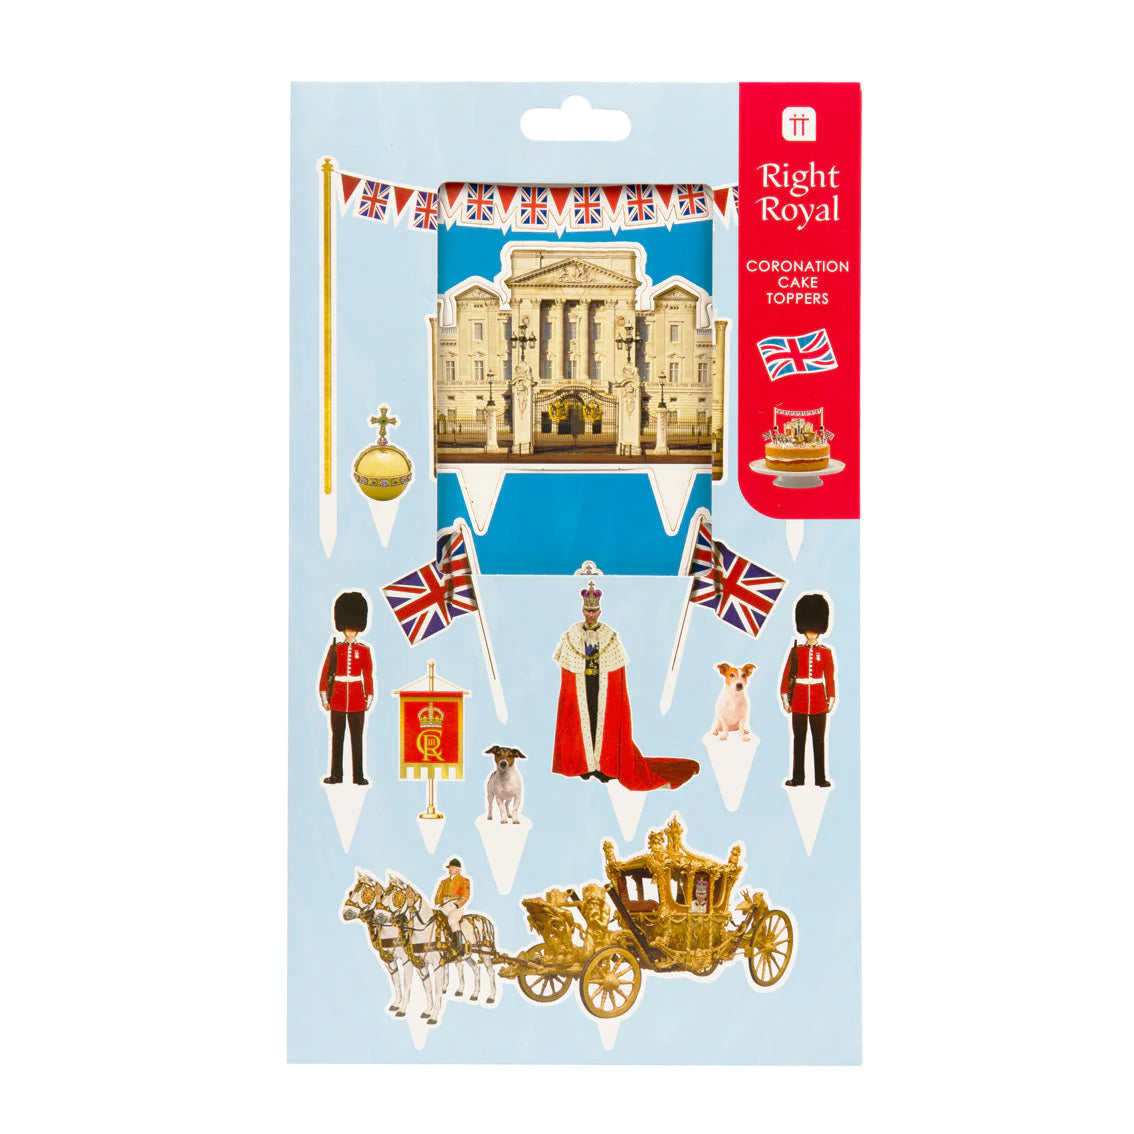 Royal Coronation Cake Toppers - 12 Pack